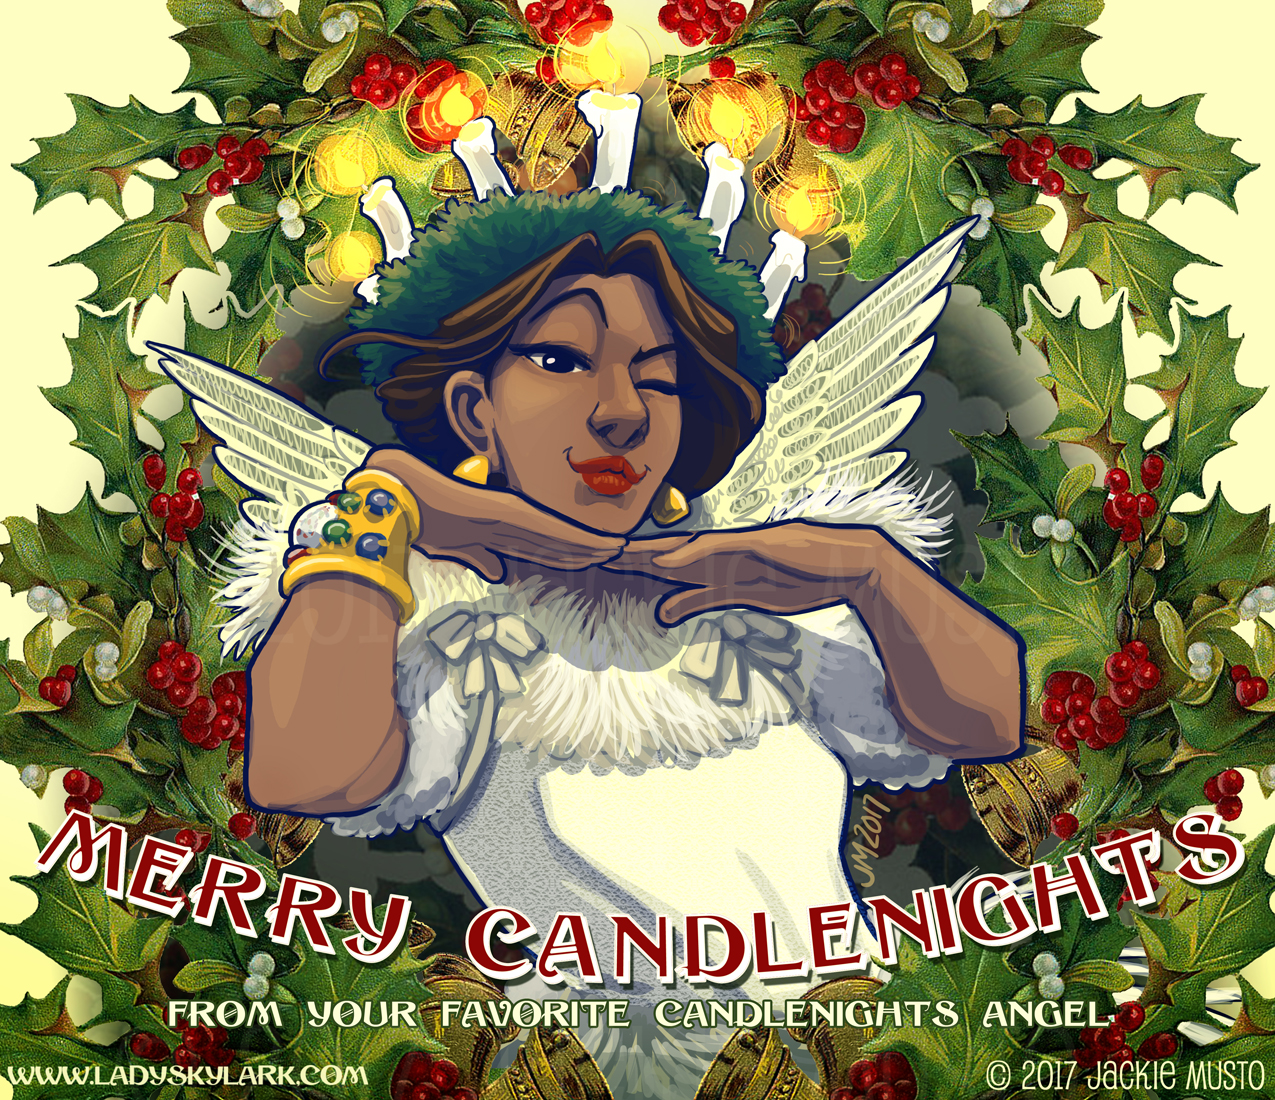 Merry Candlenights!